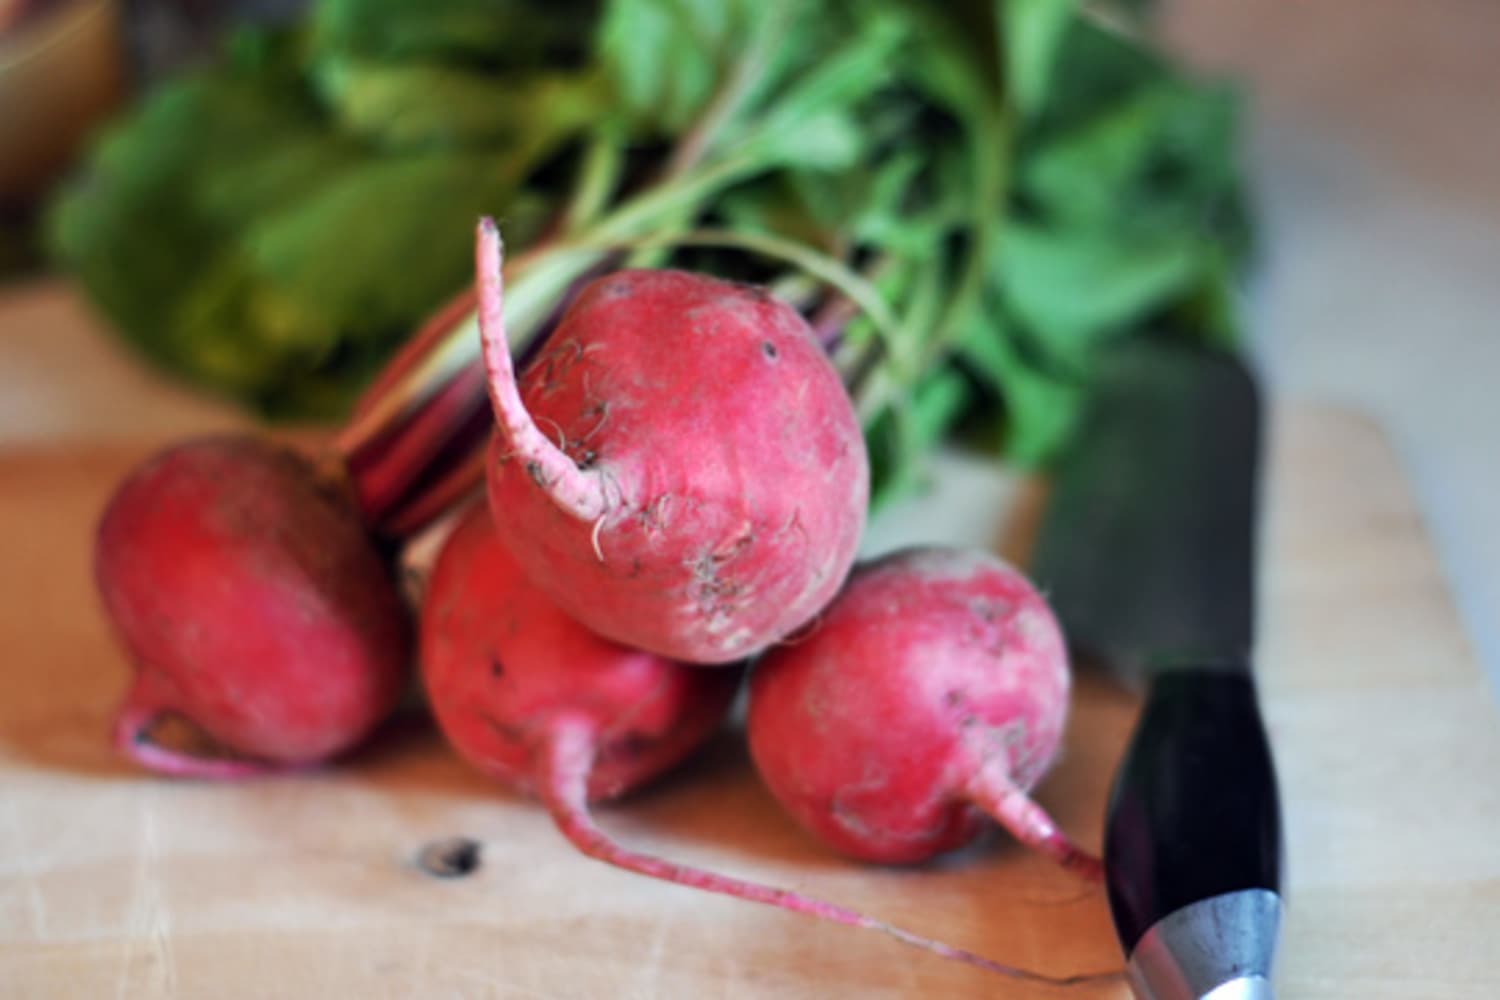 How to remove beet stains from anything and everything